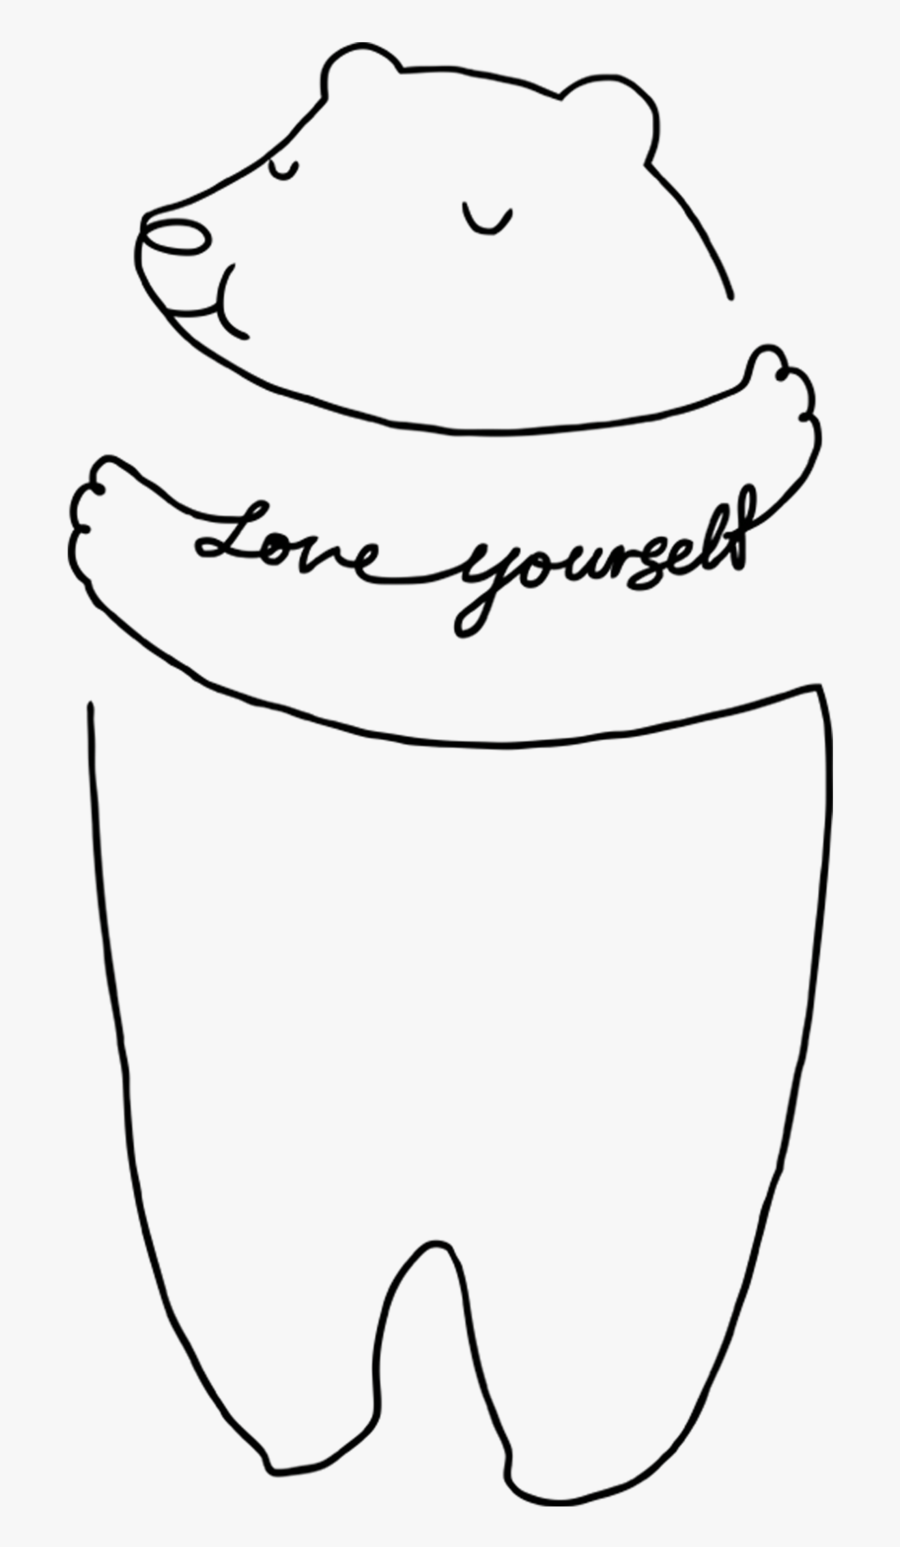 Transparent Love Tattoo Png - Love Yourself Hd, Transparent Clipart